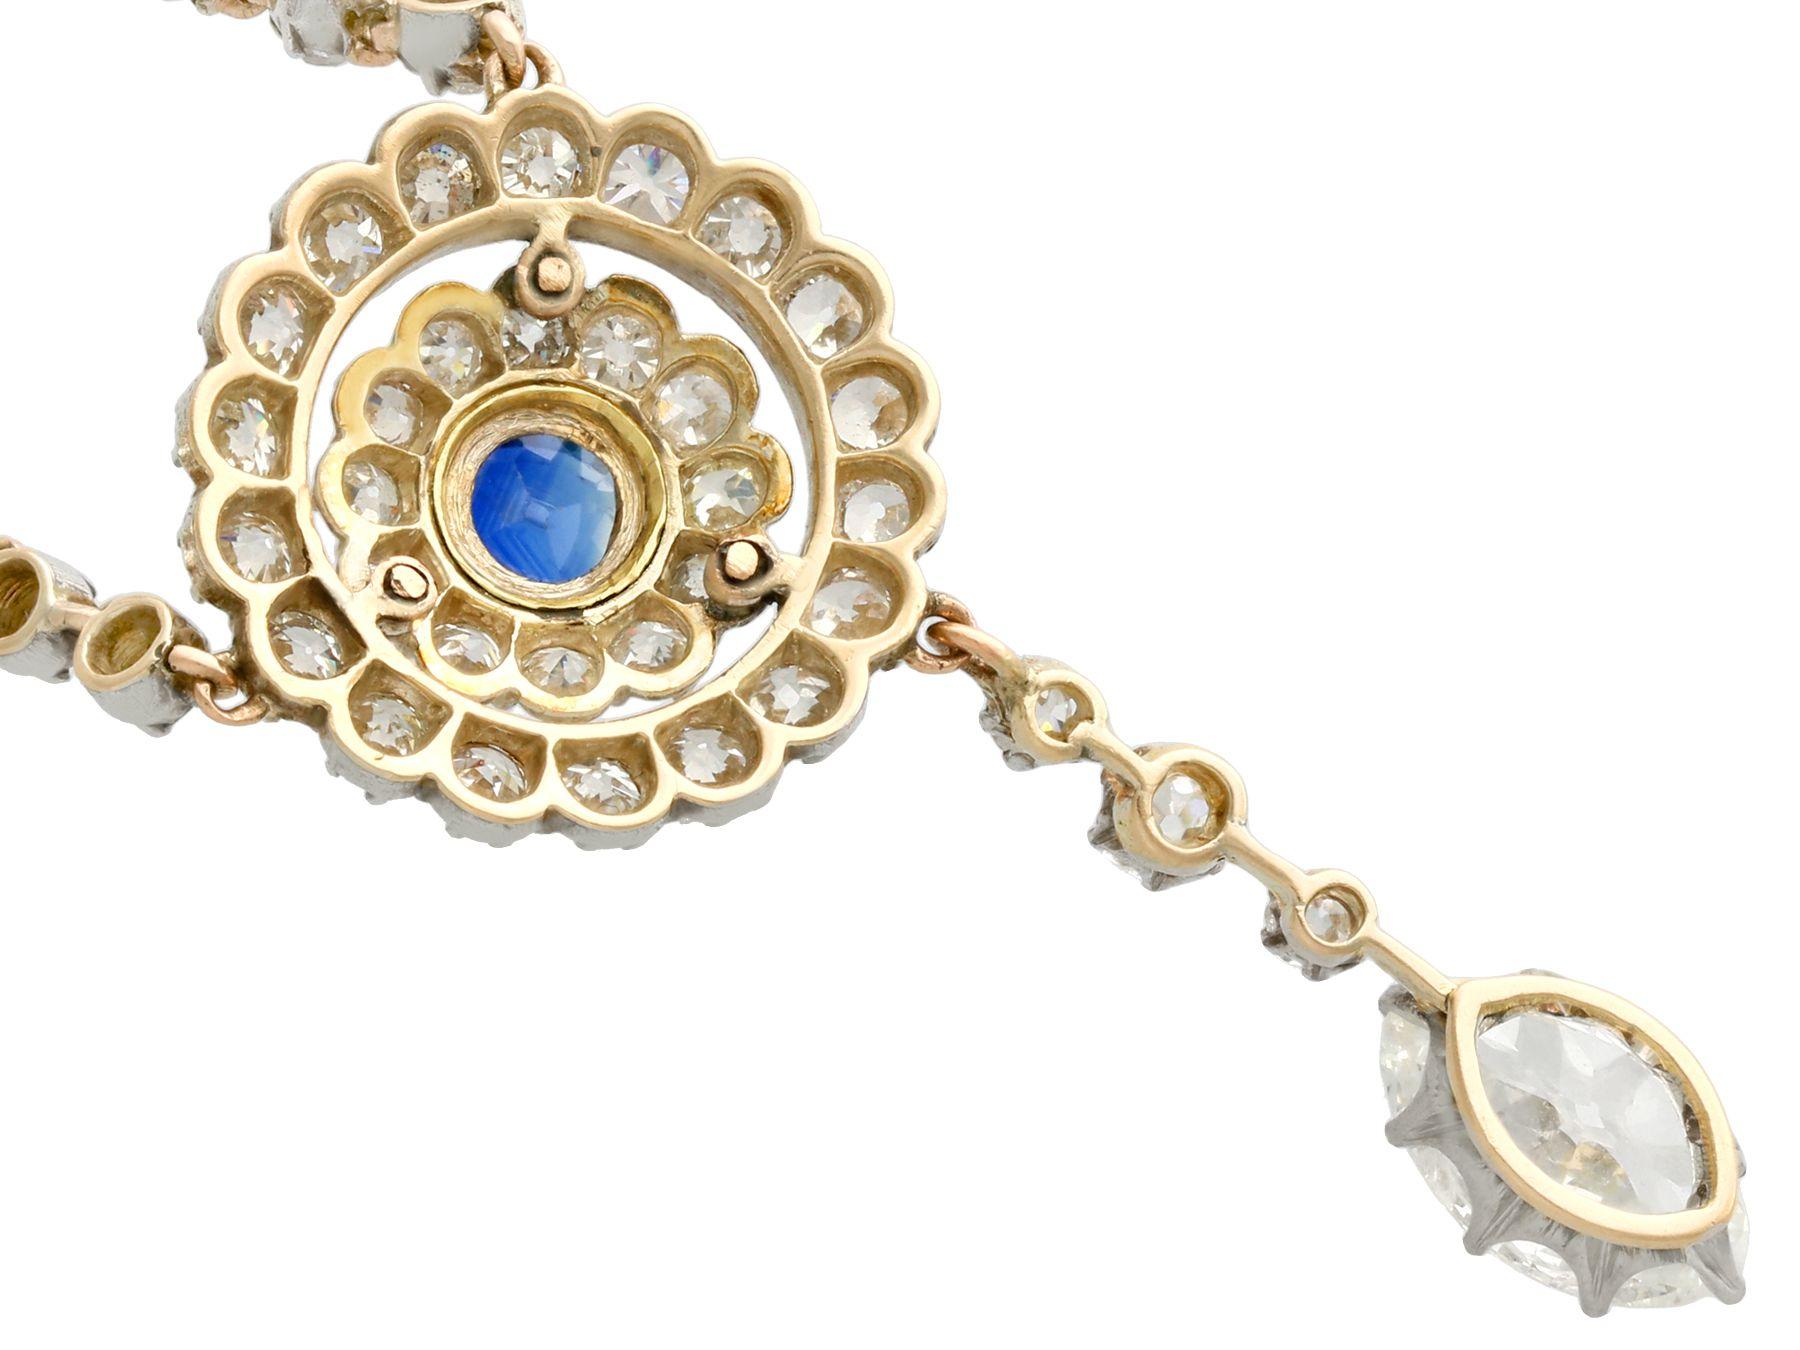 Women's Antique 1900s 3.69 Carat Diamond and Sapphire Gold and Silver Set Necklace